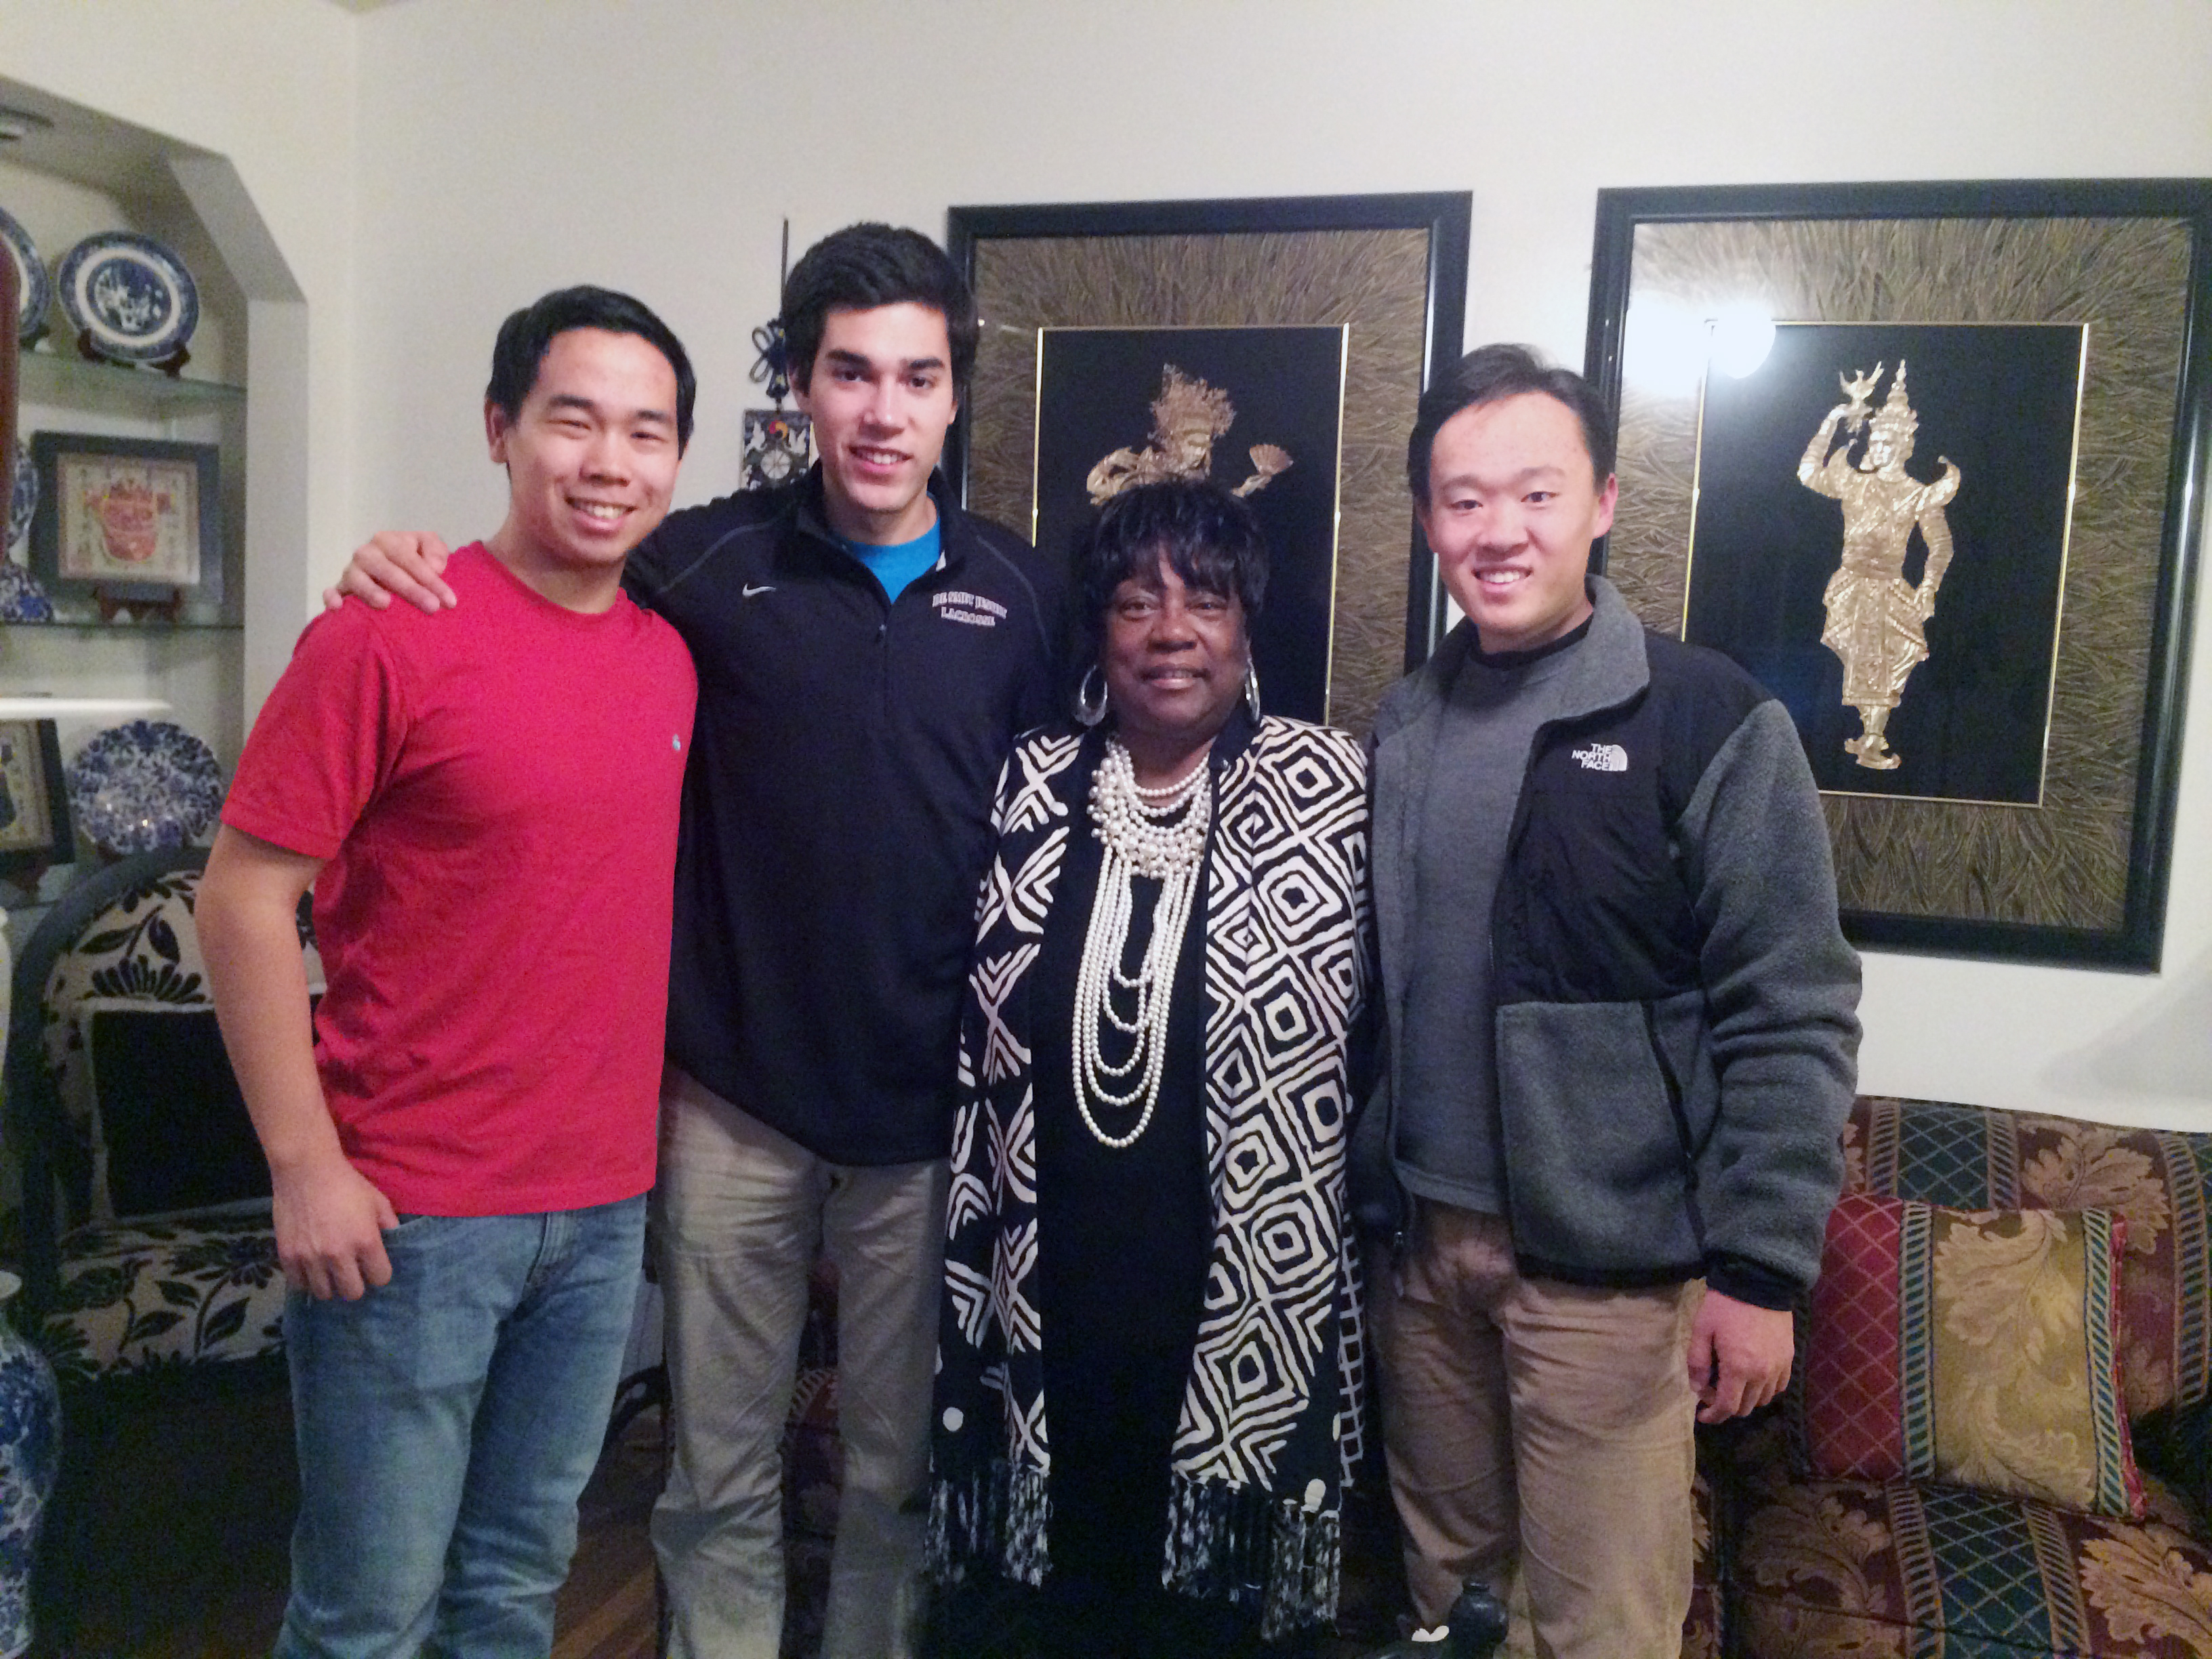 Eric Lee and friends came to the assistance of Juanita Morris. From left to right: Jeffrey Lu, Alex Conway, Morris, and Lee.